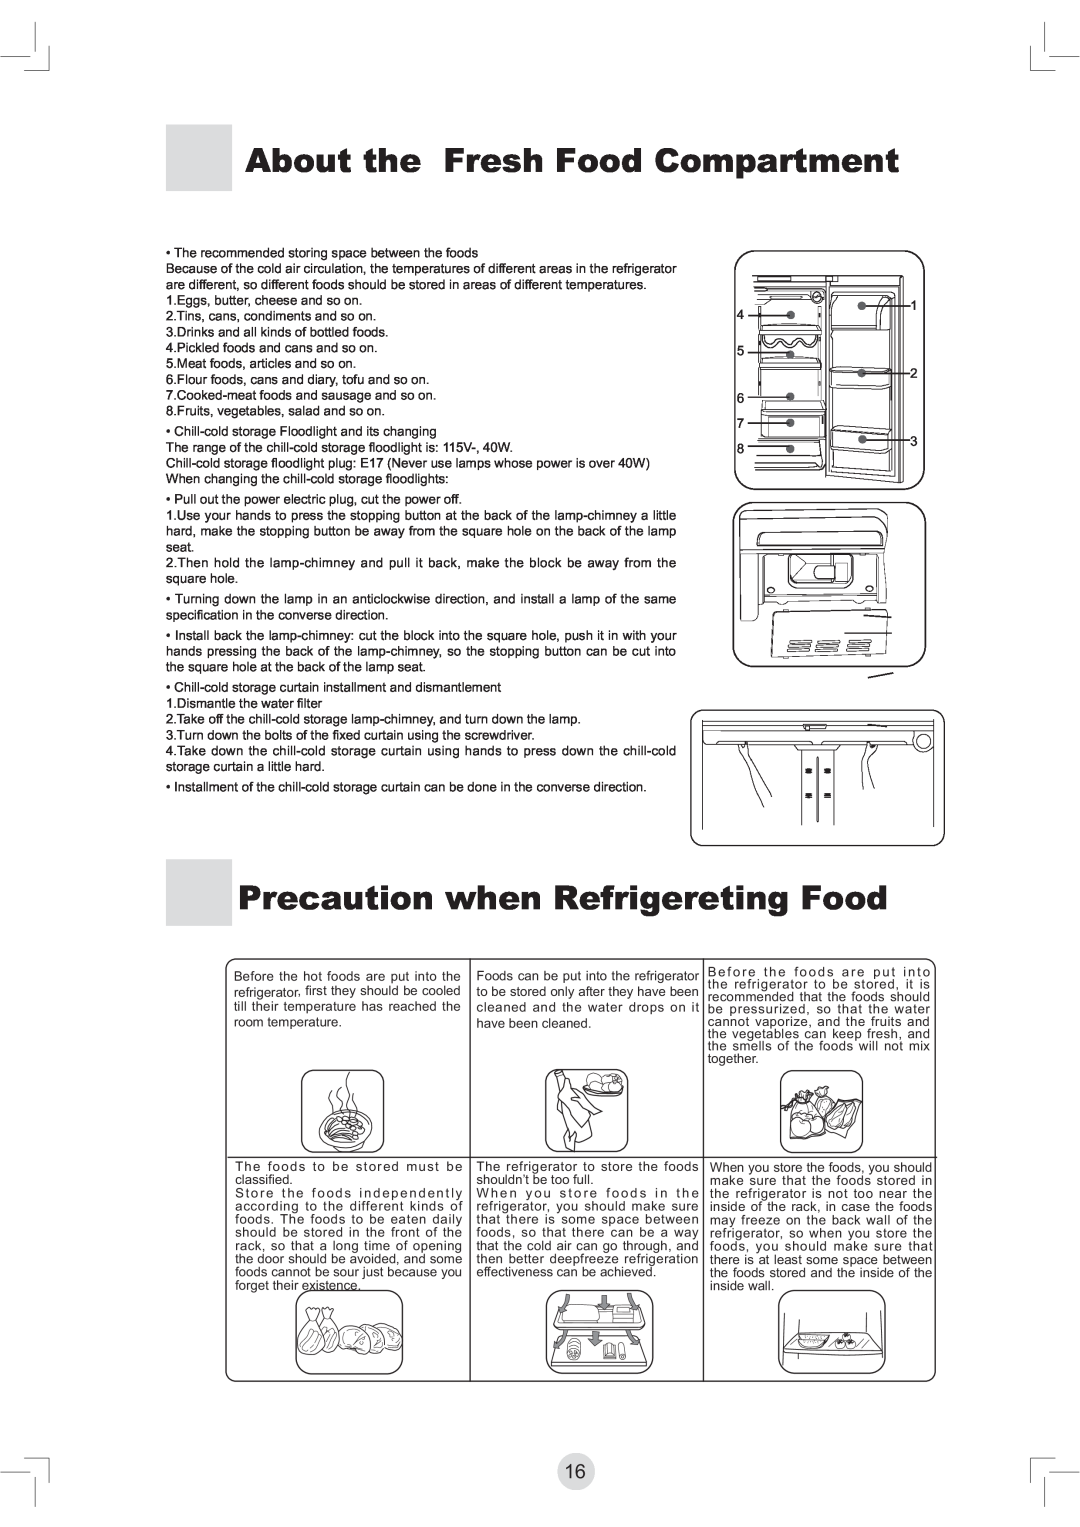 Haier RBFS21, PBFS21 warranty Precaution when Refrigereting Food, About the Fresh Food Compartment 